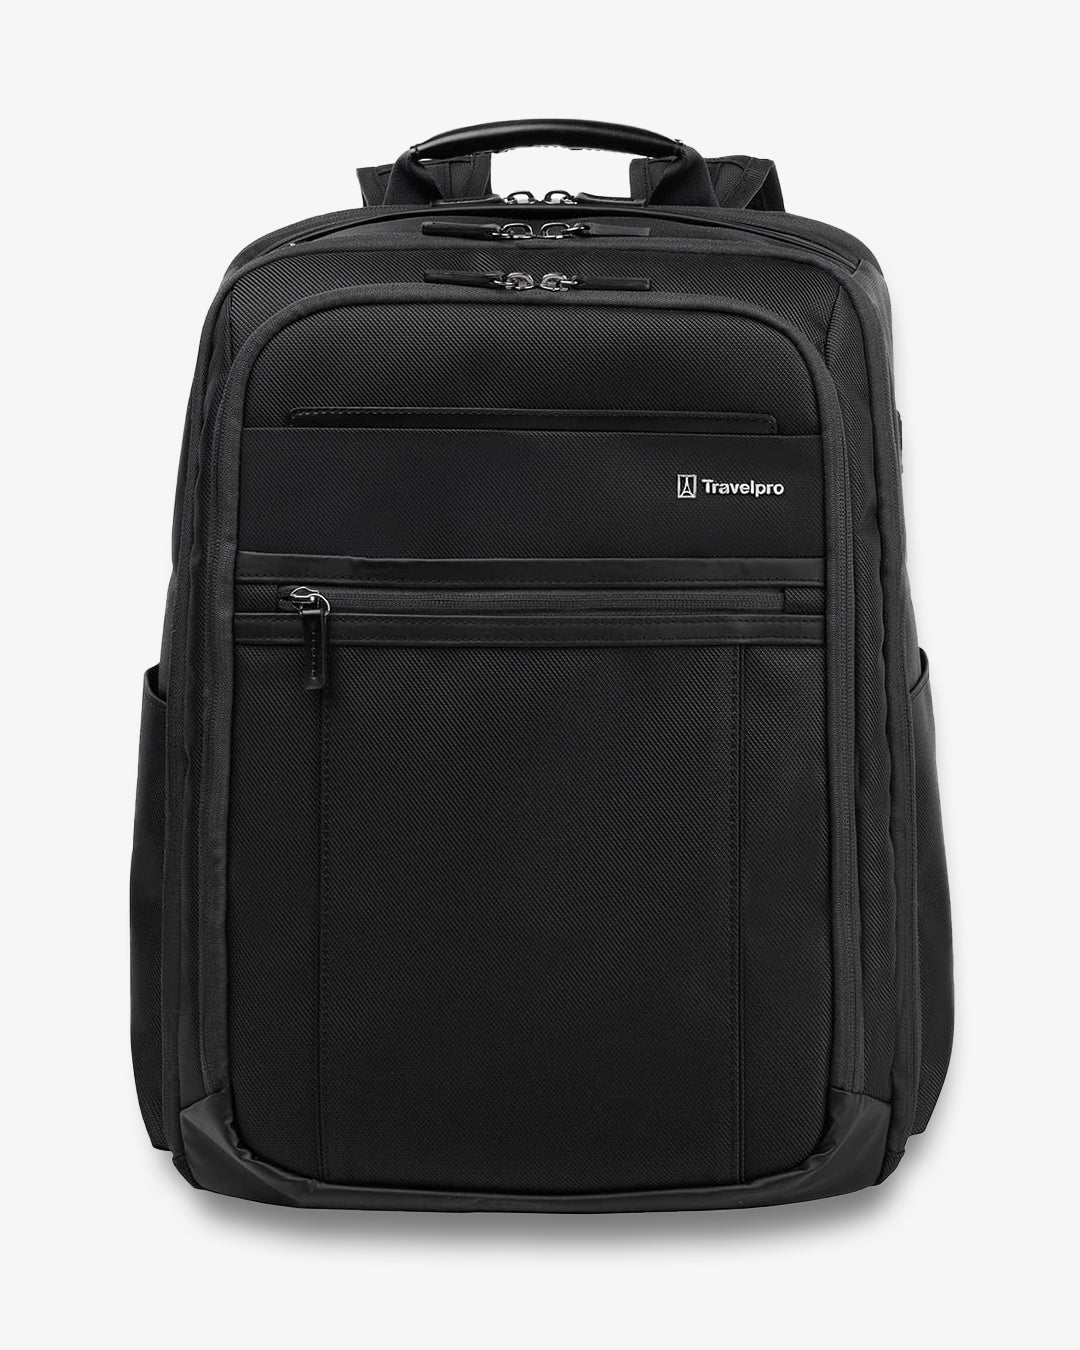 Travelpro Crew Executive Choice 3 Backpack (LARGE)